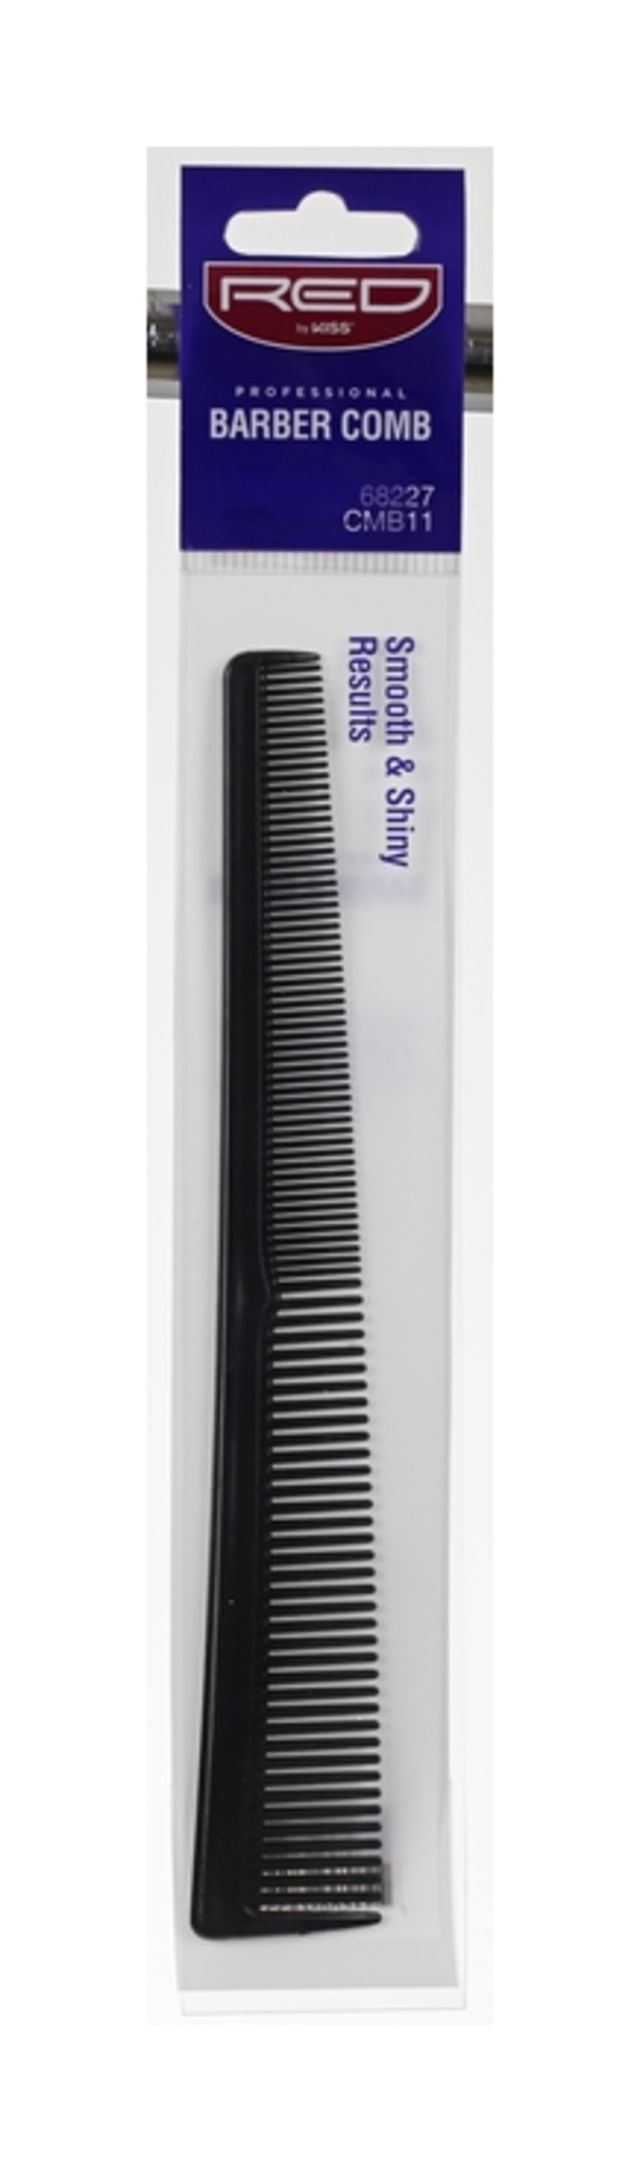 Red Professional Barber Comb